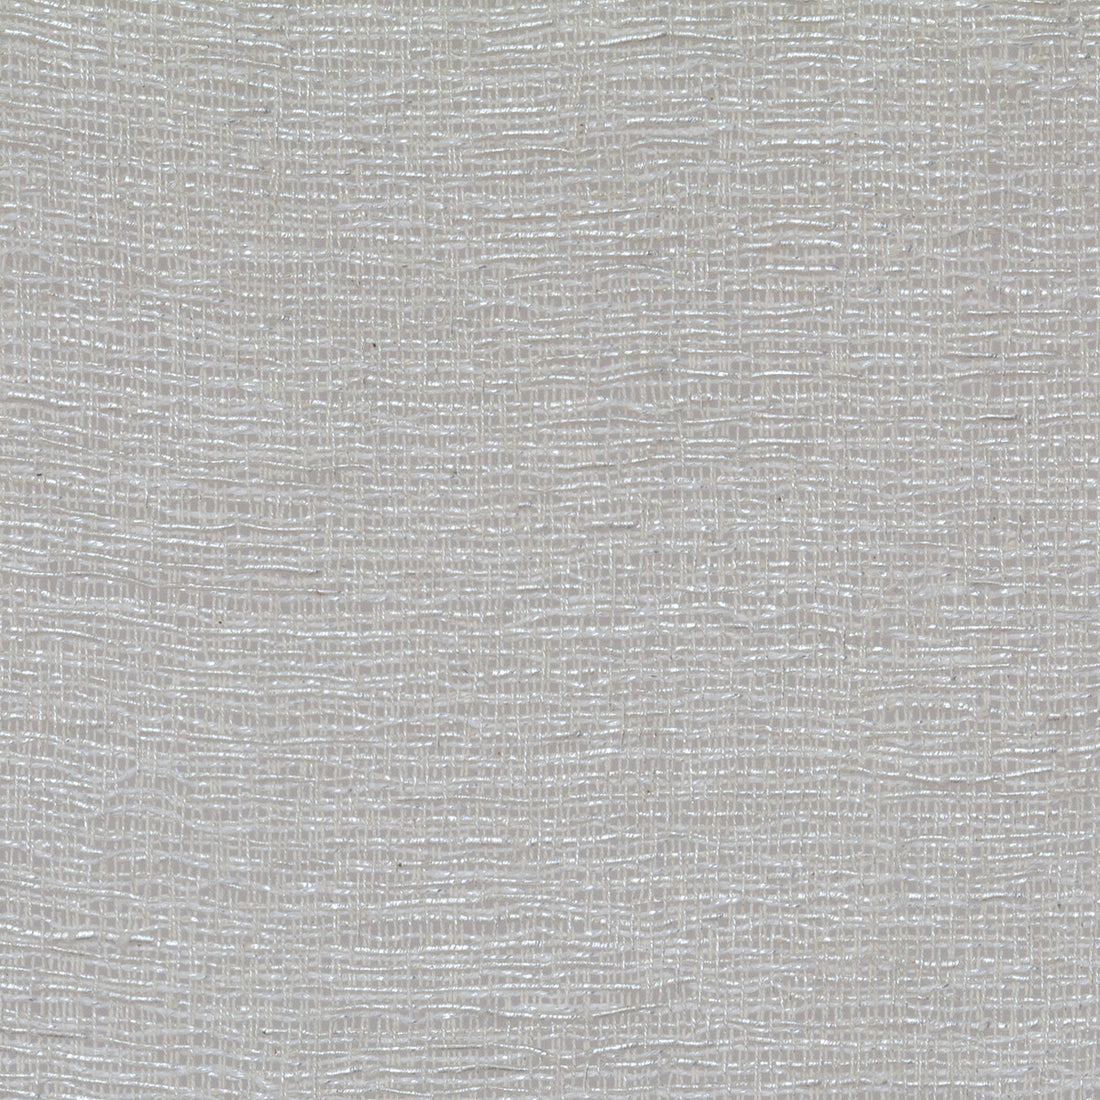 Kravet Couture fabric in 4615-1 color - pattern 4615.1.0 - by Kravet Couture